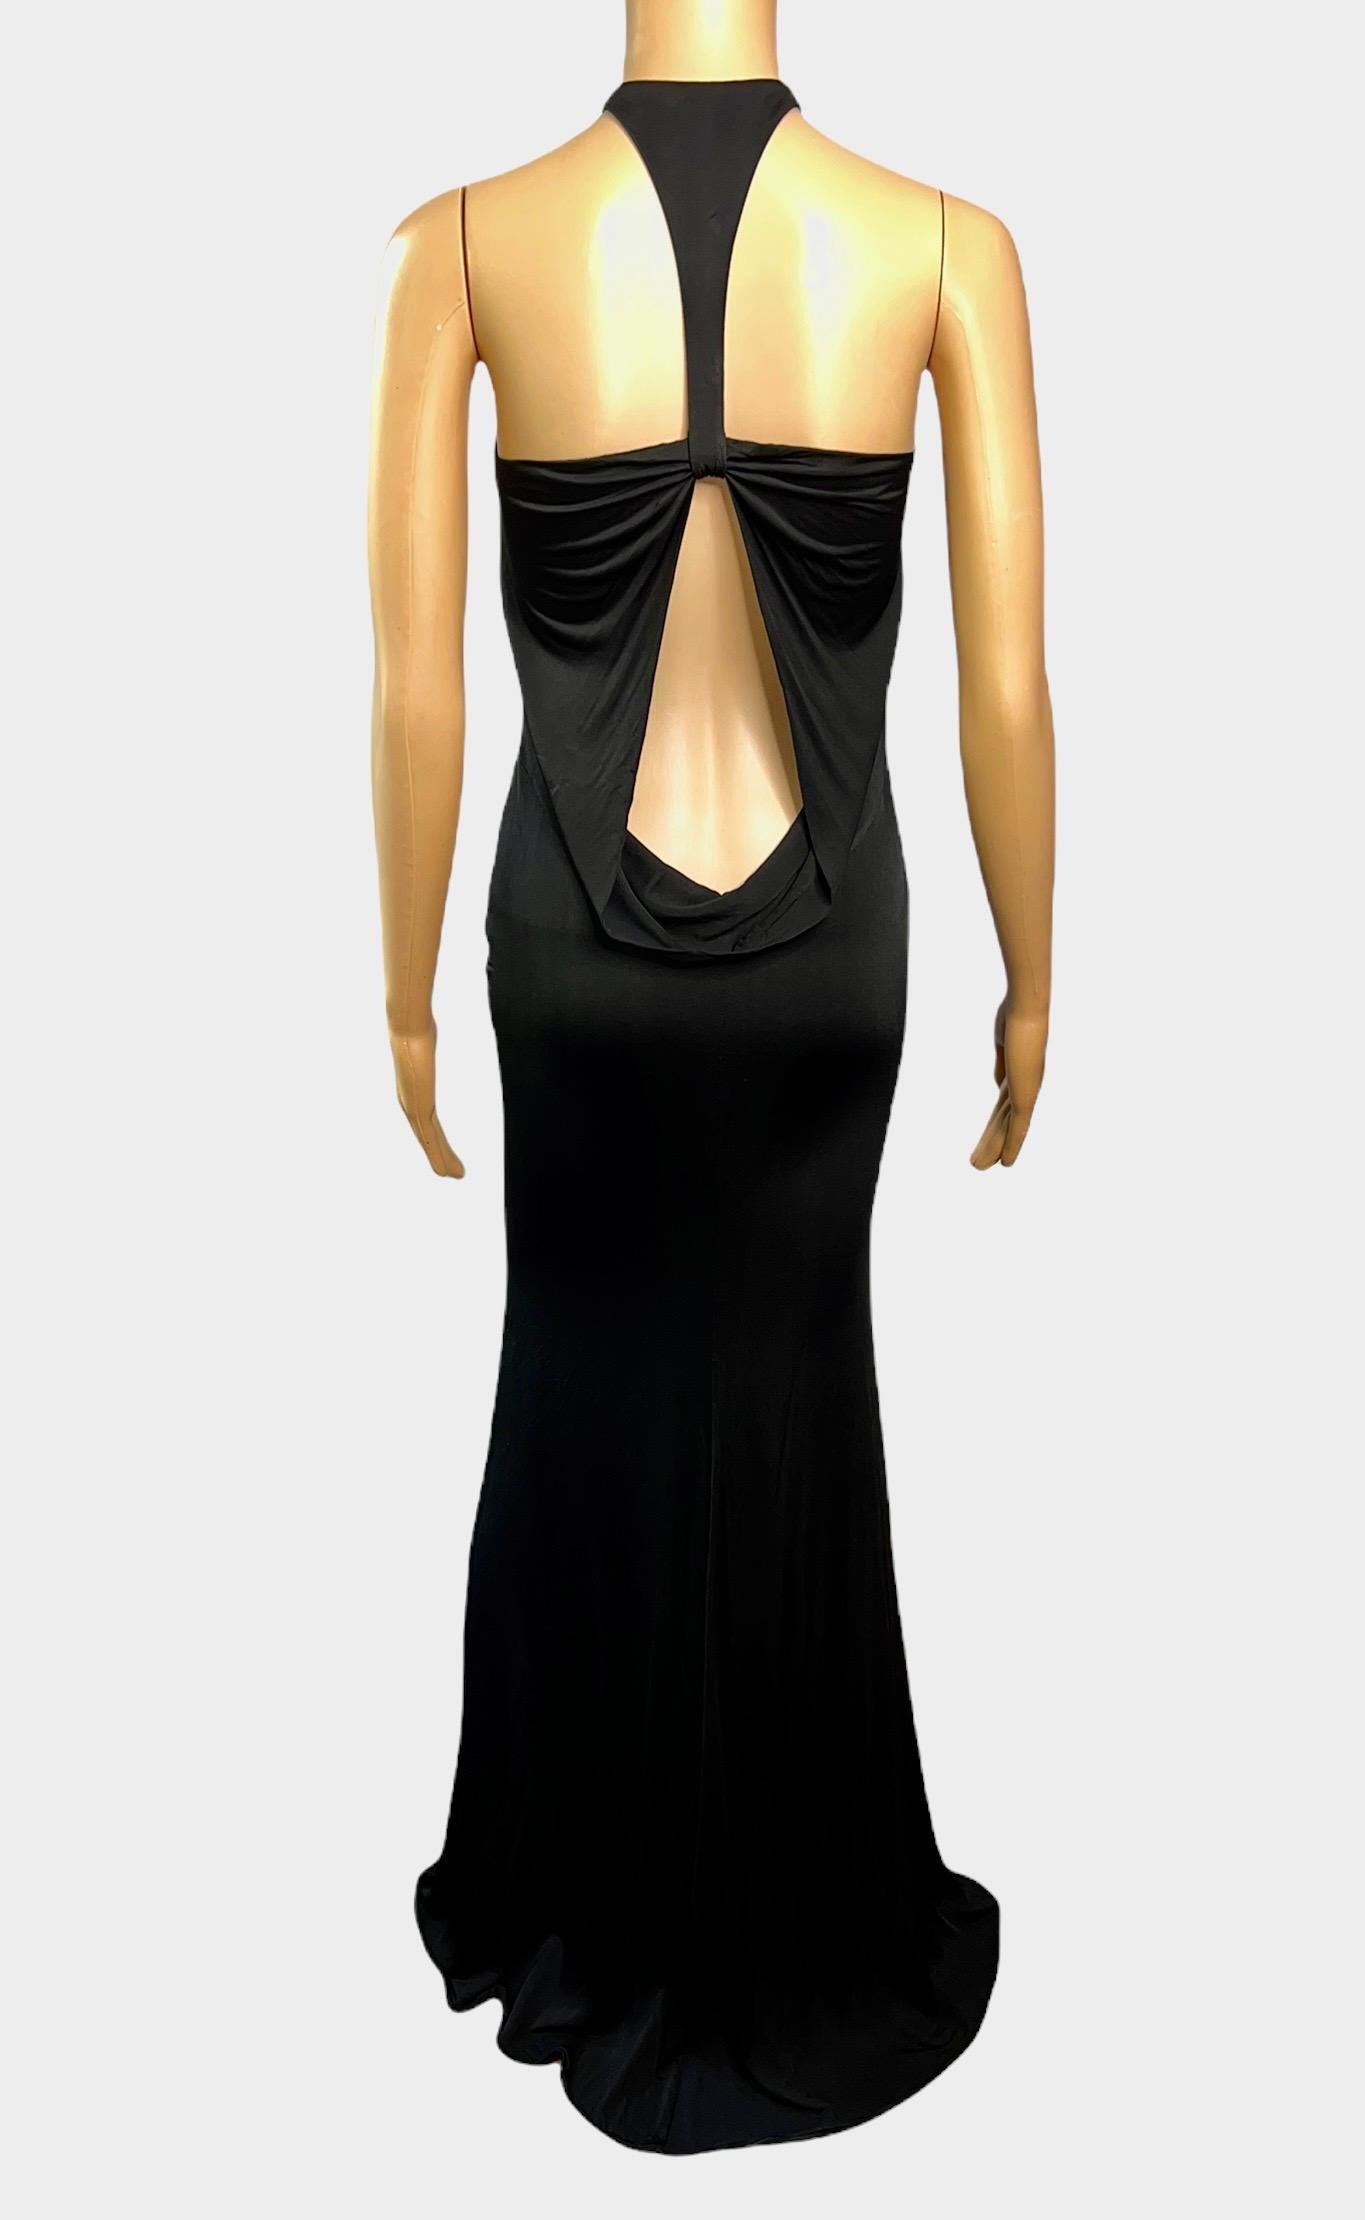 Tom Ford for Gucci F/W 2004 Plunging Cutout Black Evening Dress Gown 1